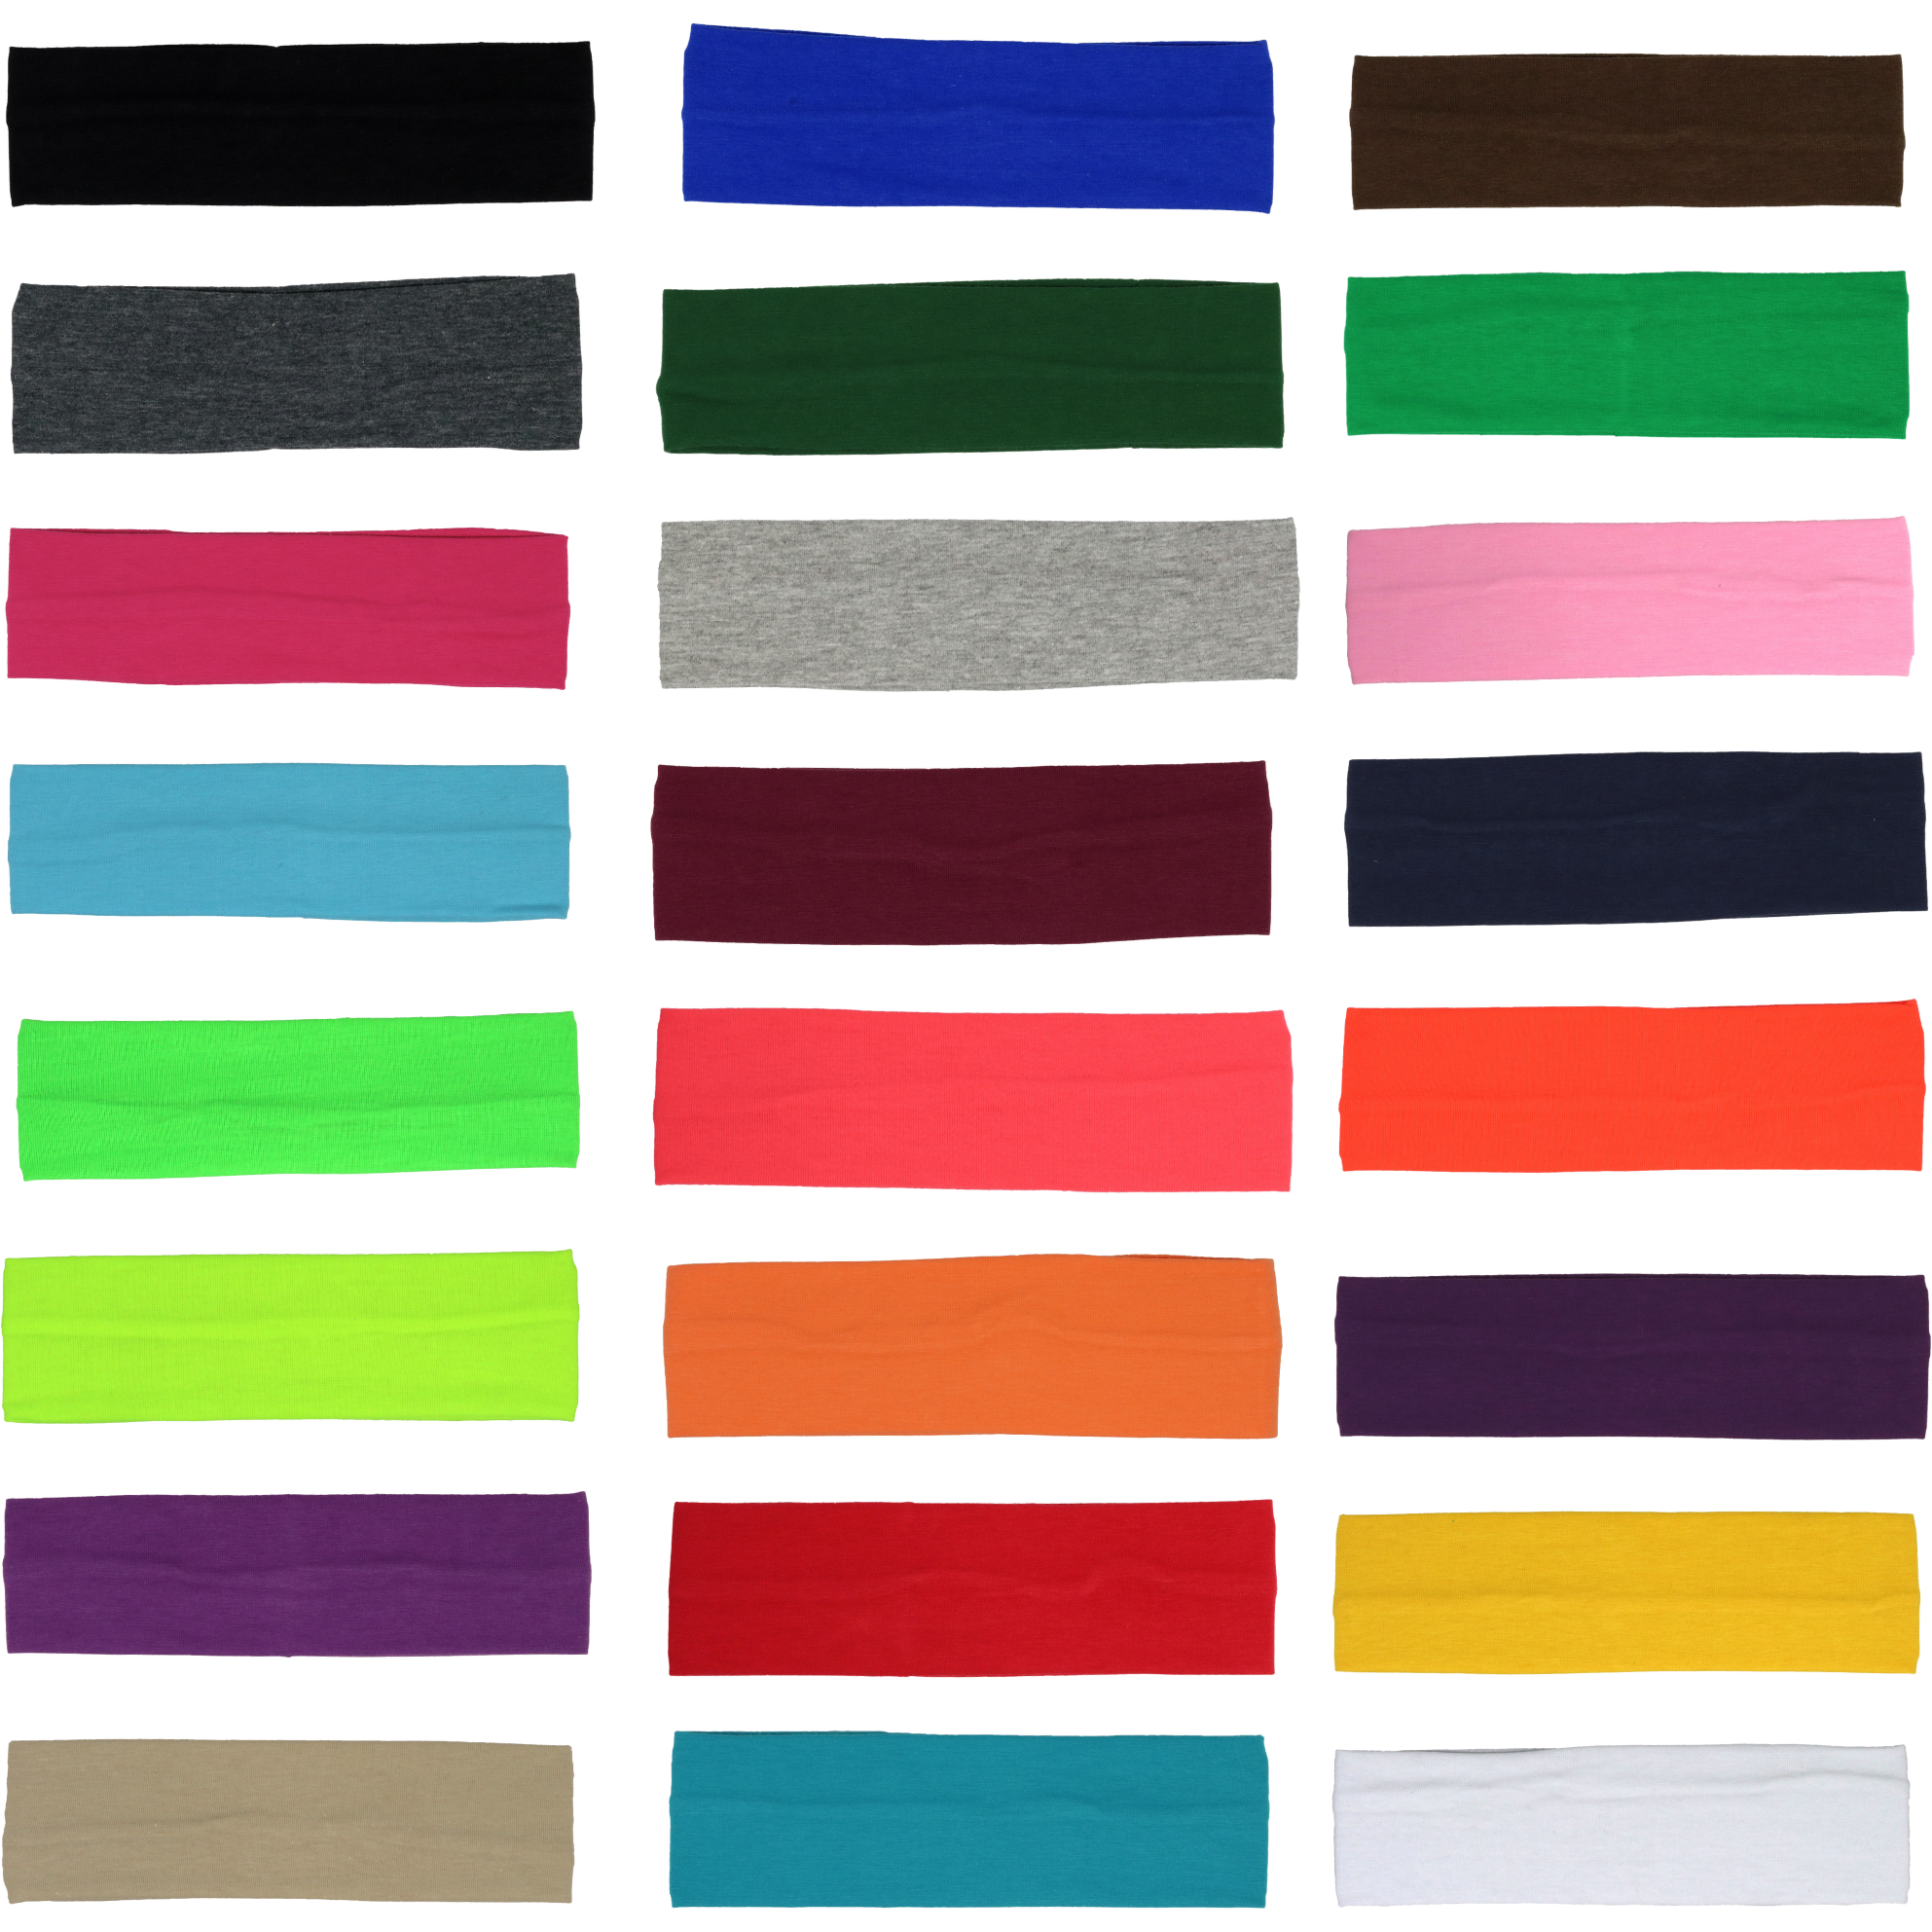 6Pack Women's Yoga Running Headbands Sports Workout Hair Bands,Head Bands  Stretch for Hair Sweatband Fitness Head Wraps